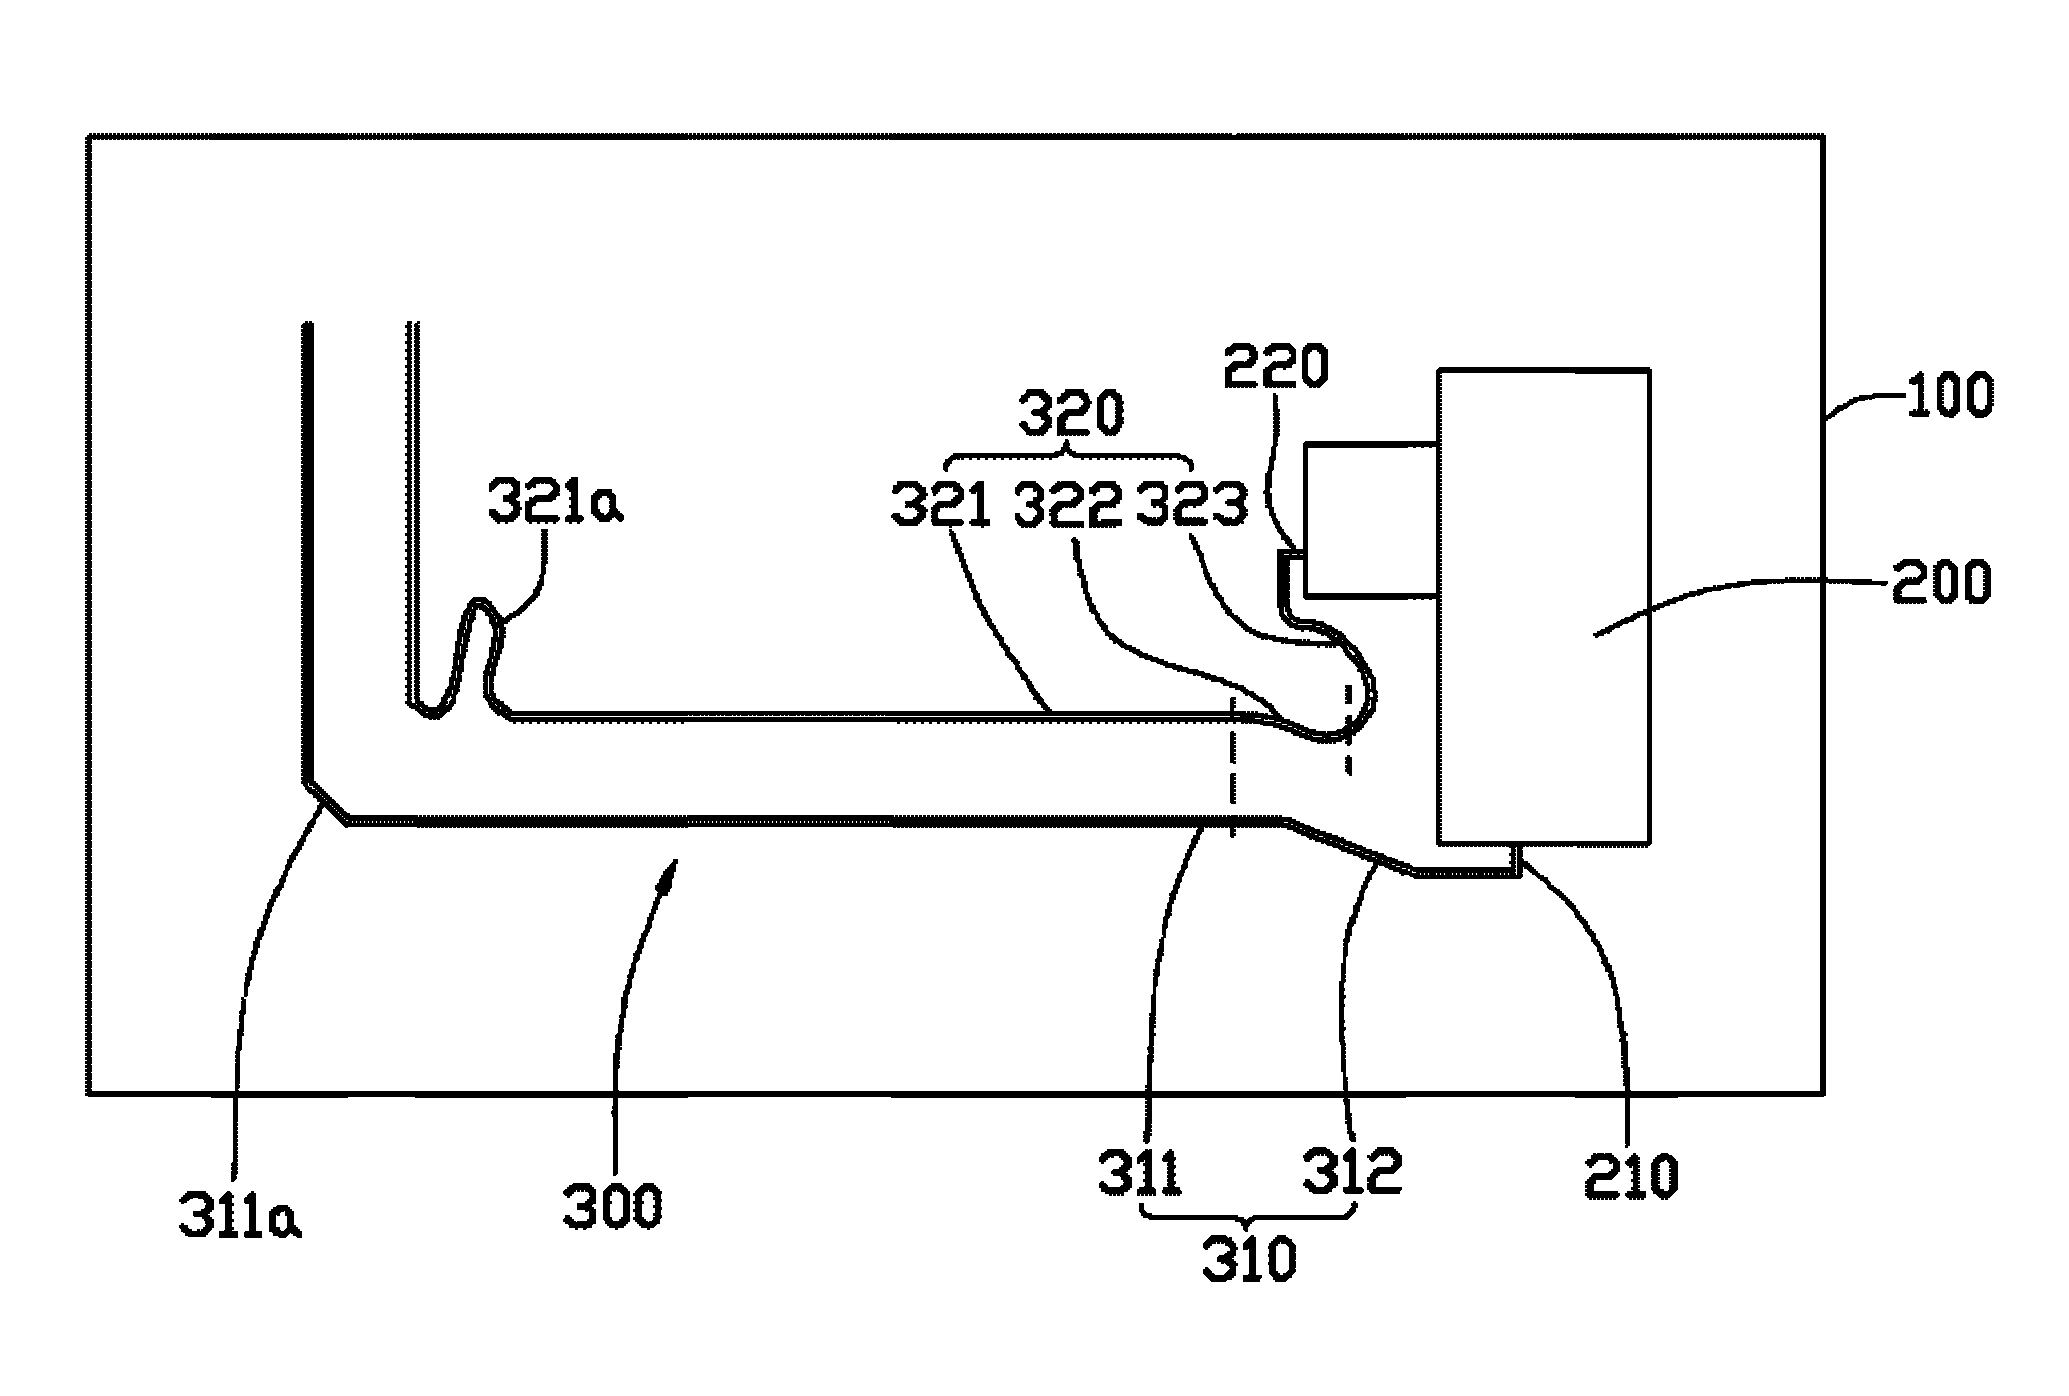 Printed circuit board and differential wire wiring method